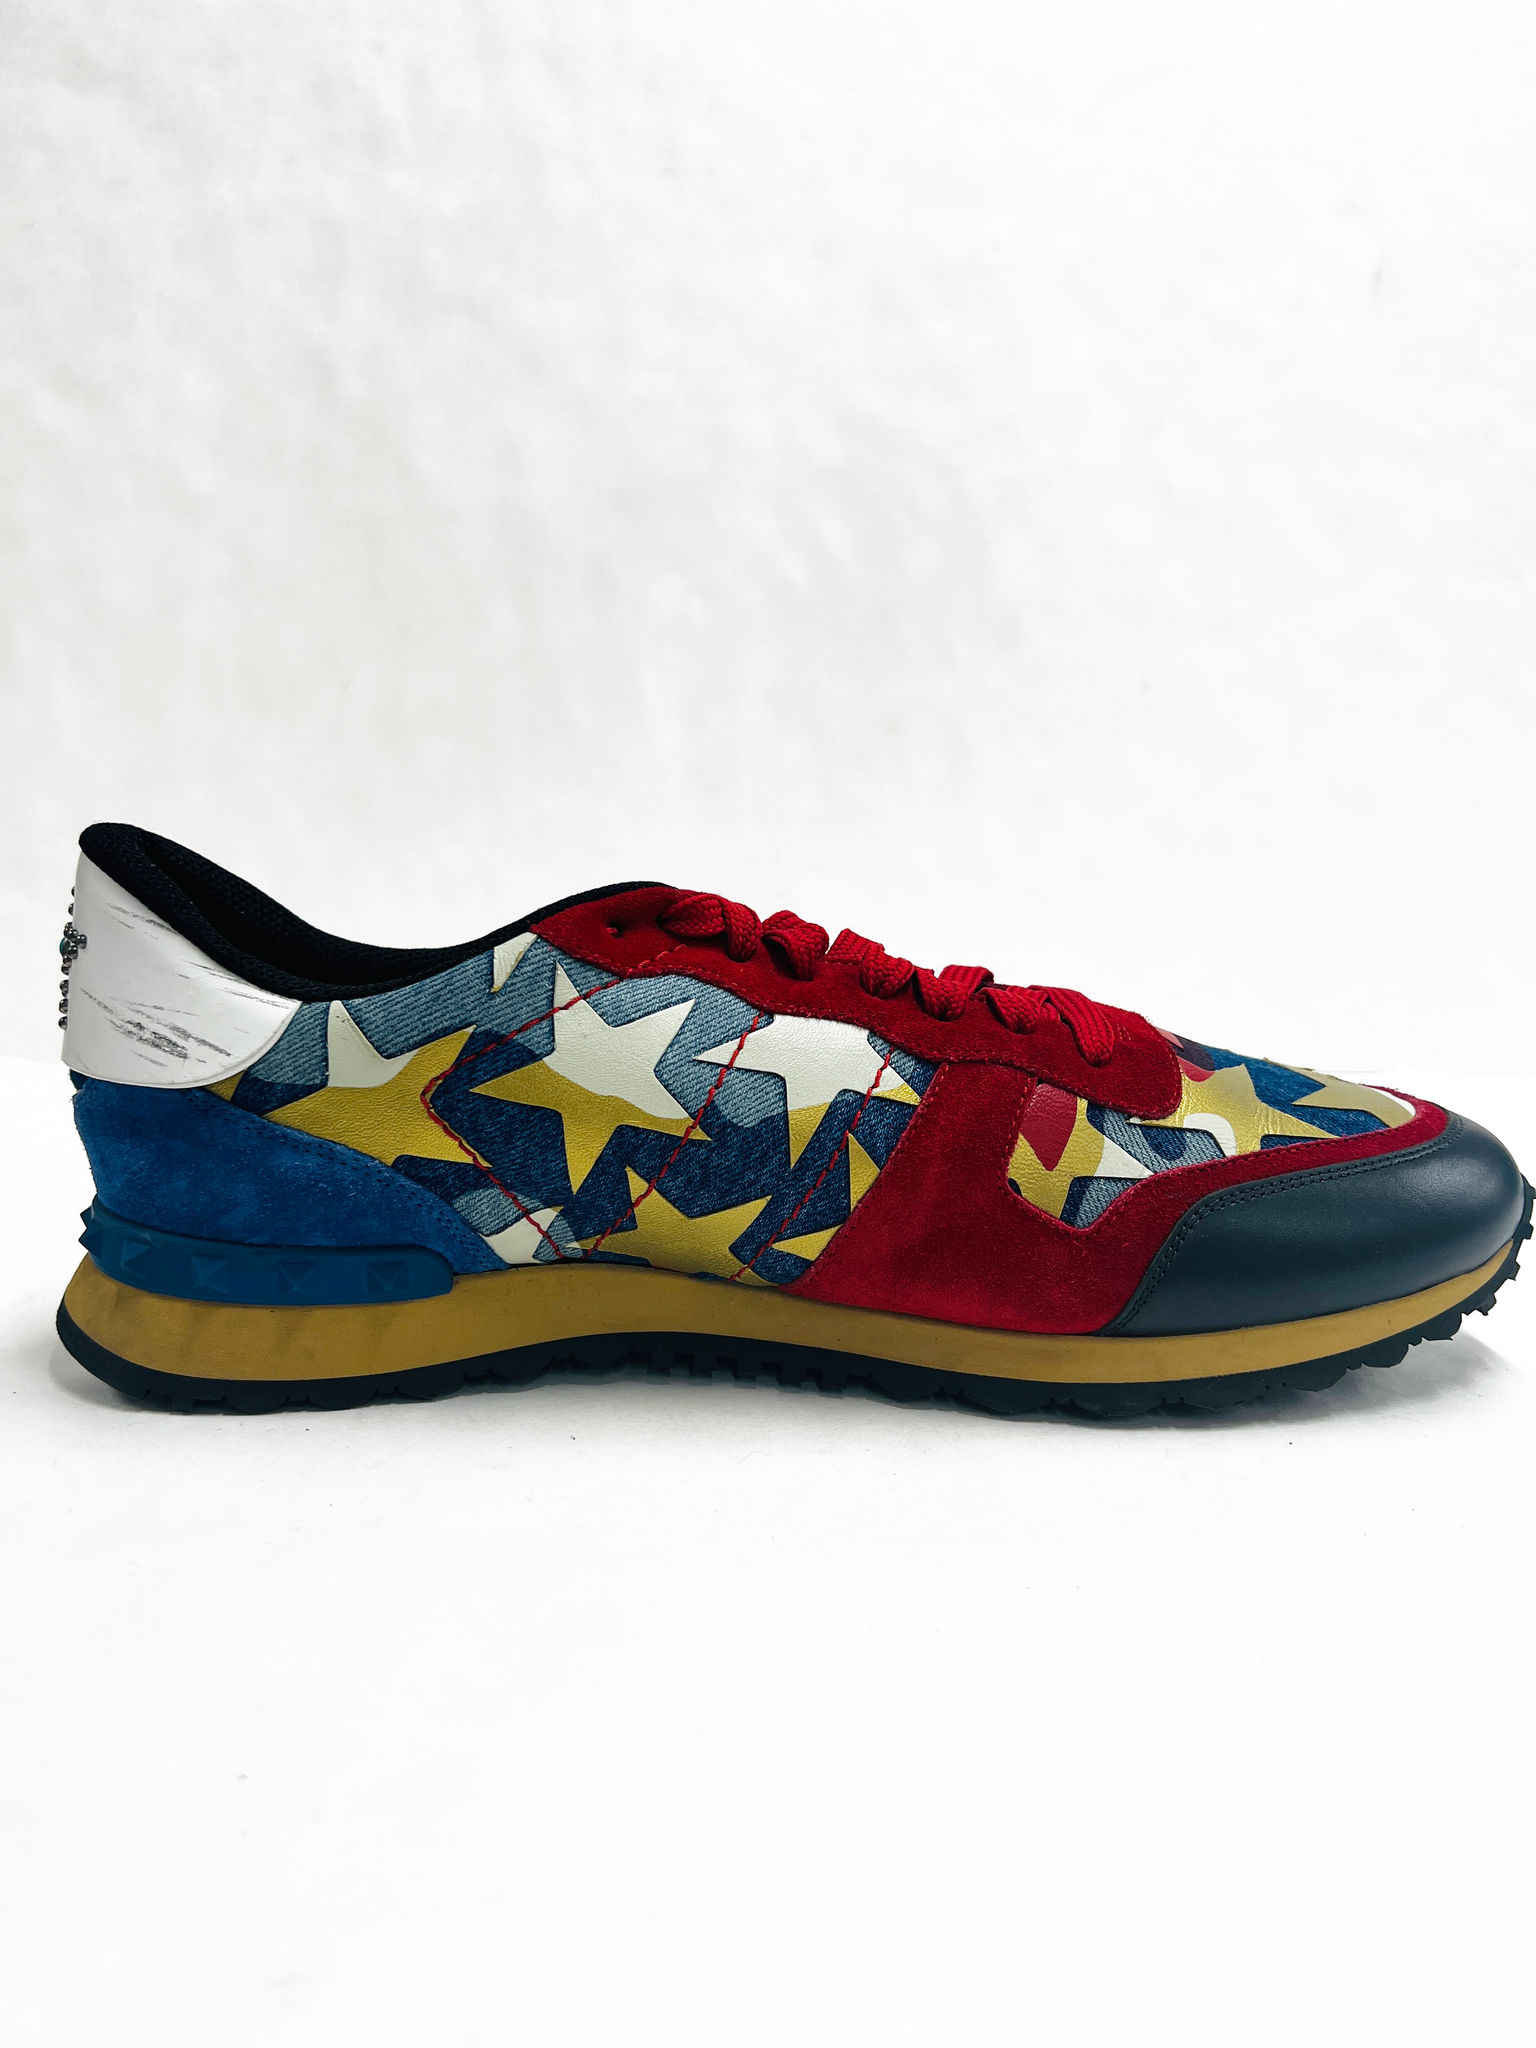 CA VALENTINO ROCKRUNNER STAR-STUDDED LEATHER SNEAKER RED/ WHITE/ BLUE CAMO STAR TRAINER-3